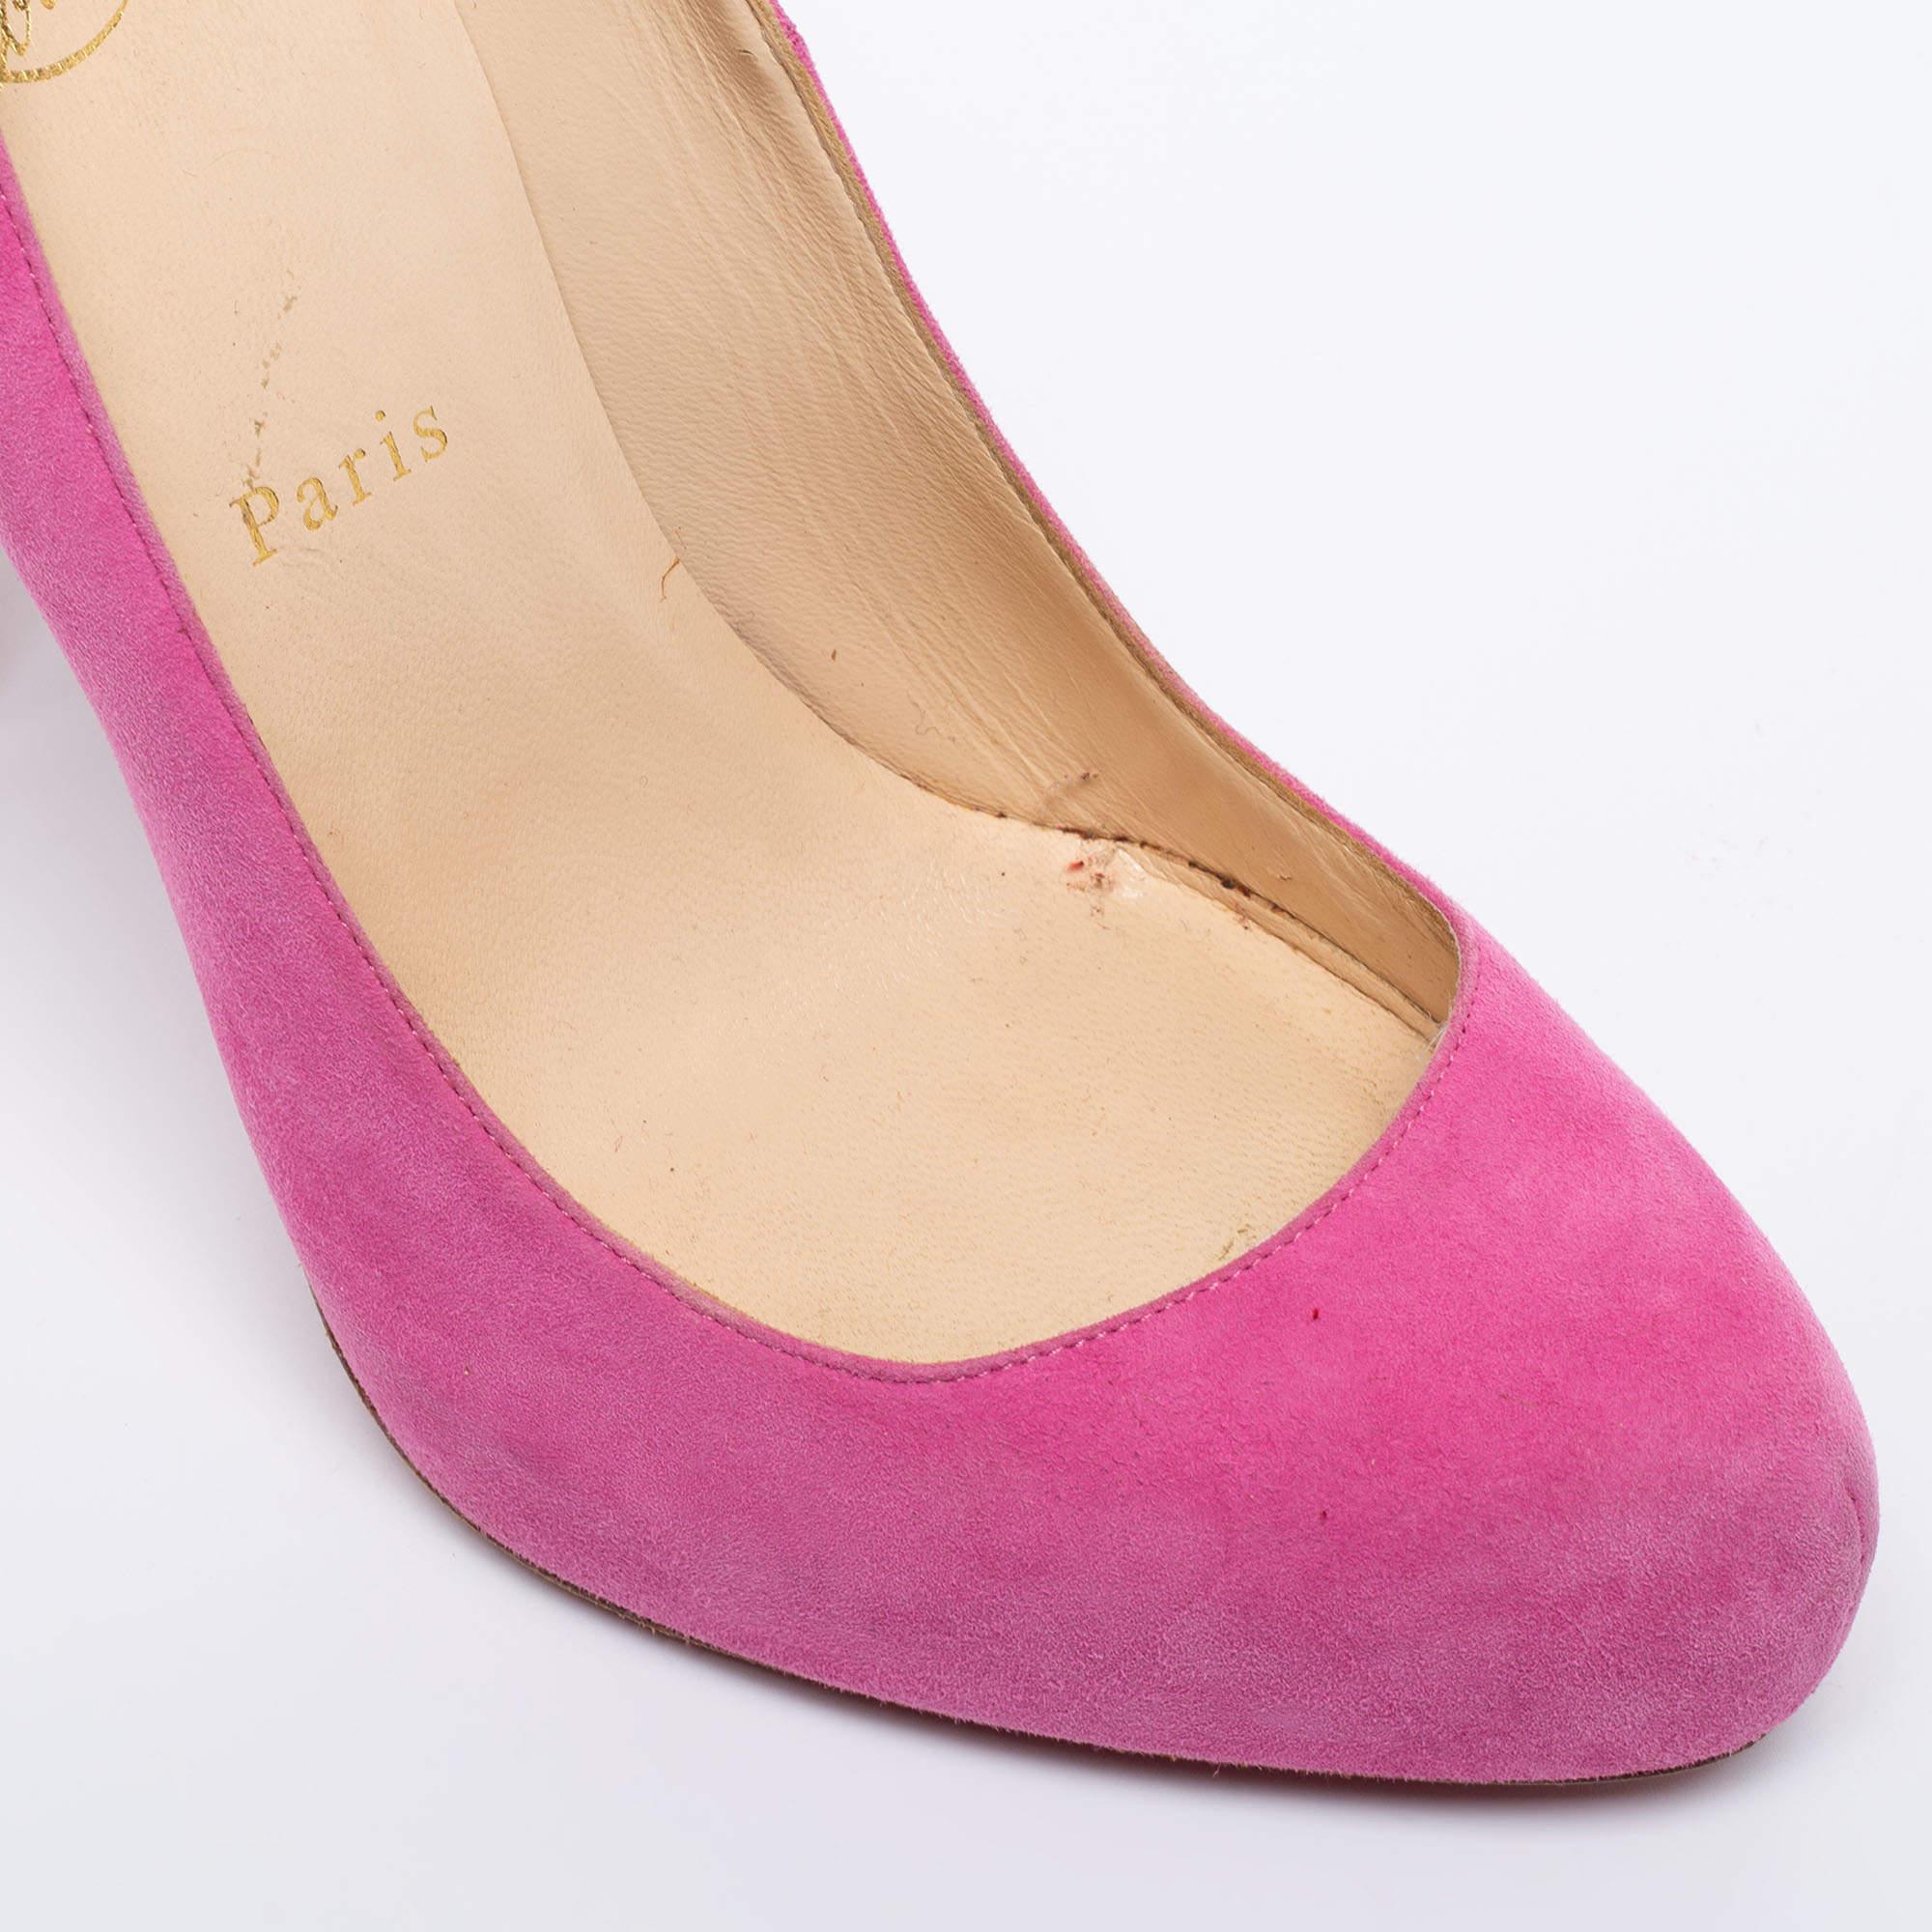 Christian Louboutin Pink Suede Elisa Pumps Size 38.5 For Sale 1